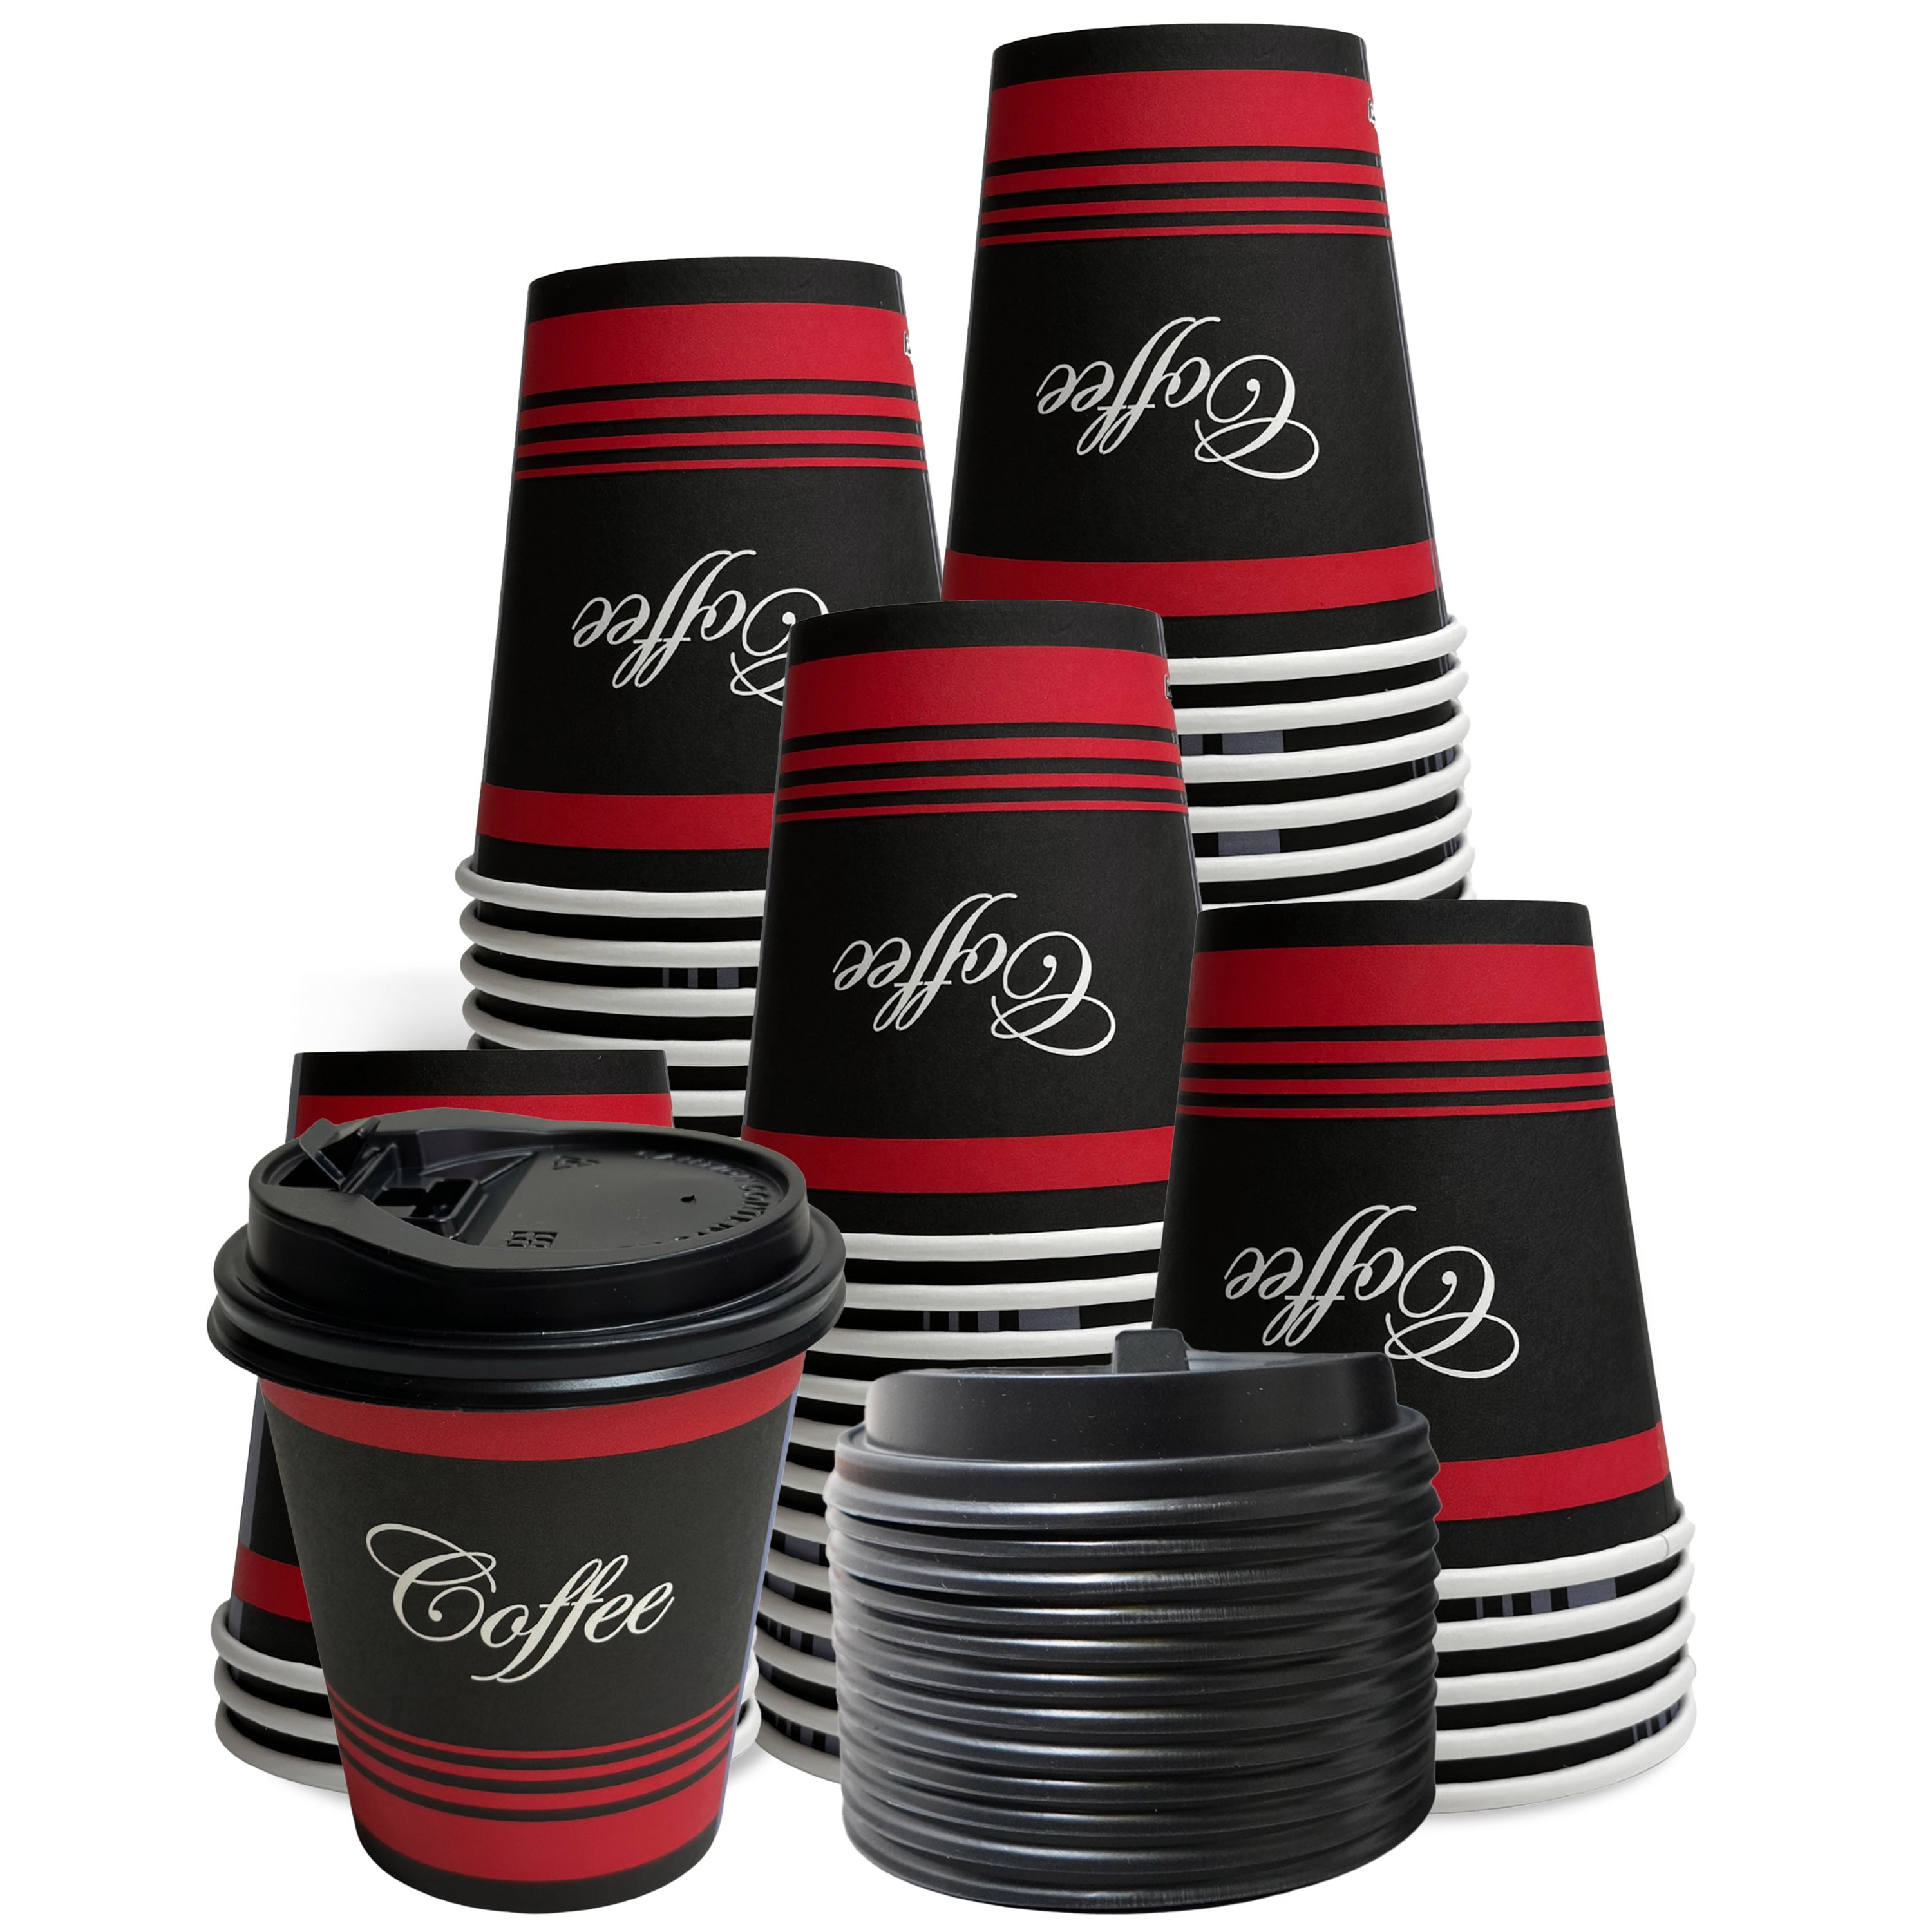 120 Pcs 12 oz Christmas Paper Coffee Cups with Lids Disposable Paper Cups  for Hot Chocolate Cocoa Ch…See more 120 Pcs 12 oz Christmas Paper Coffee